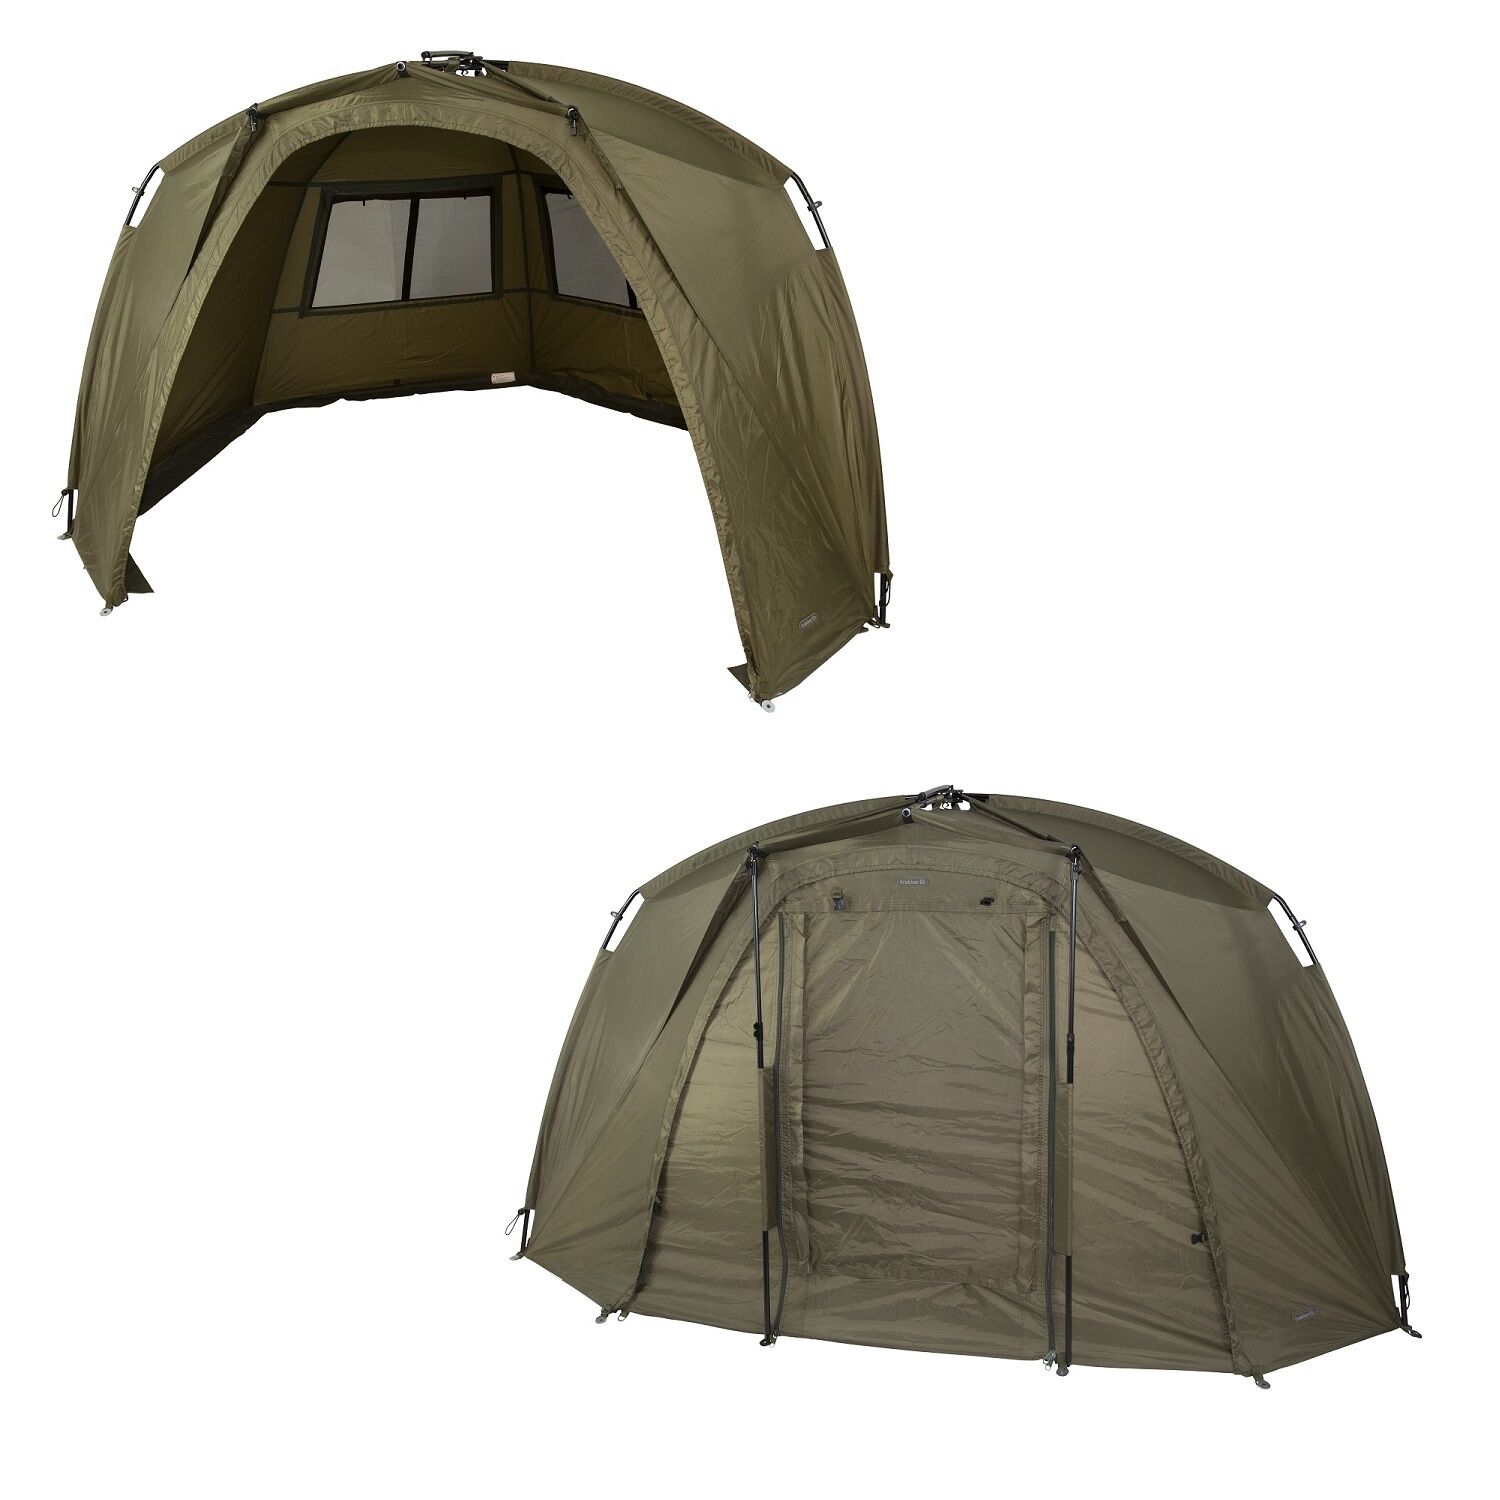 Infill Panel Trakker Tempest Brolly 100  New 2021 Model With Rear Vents